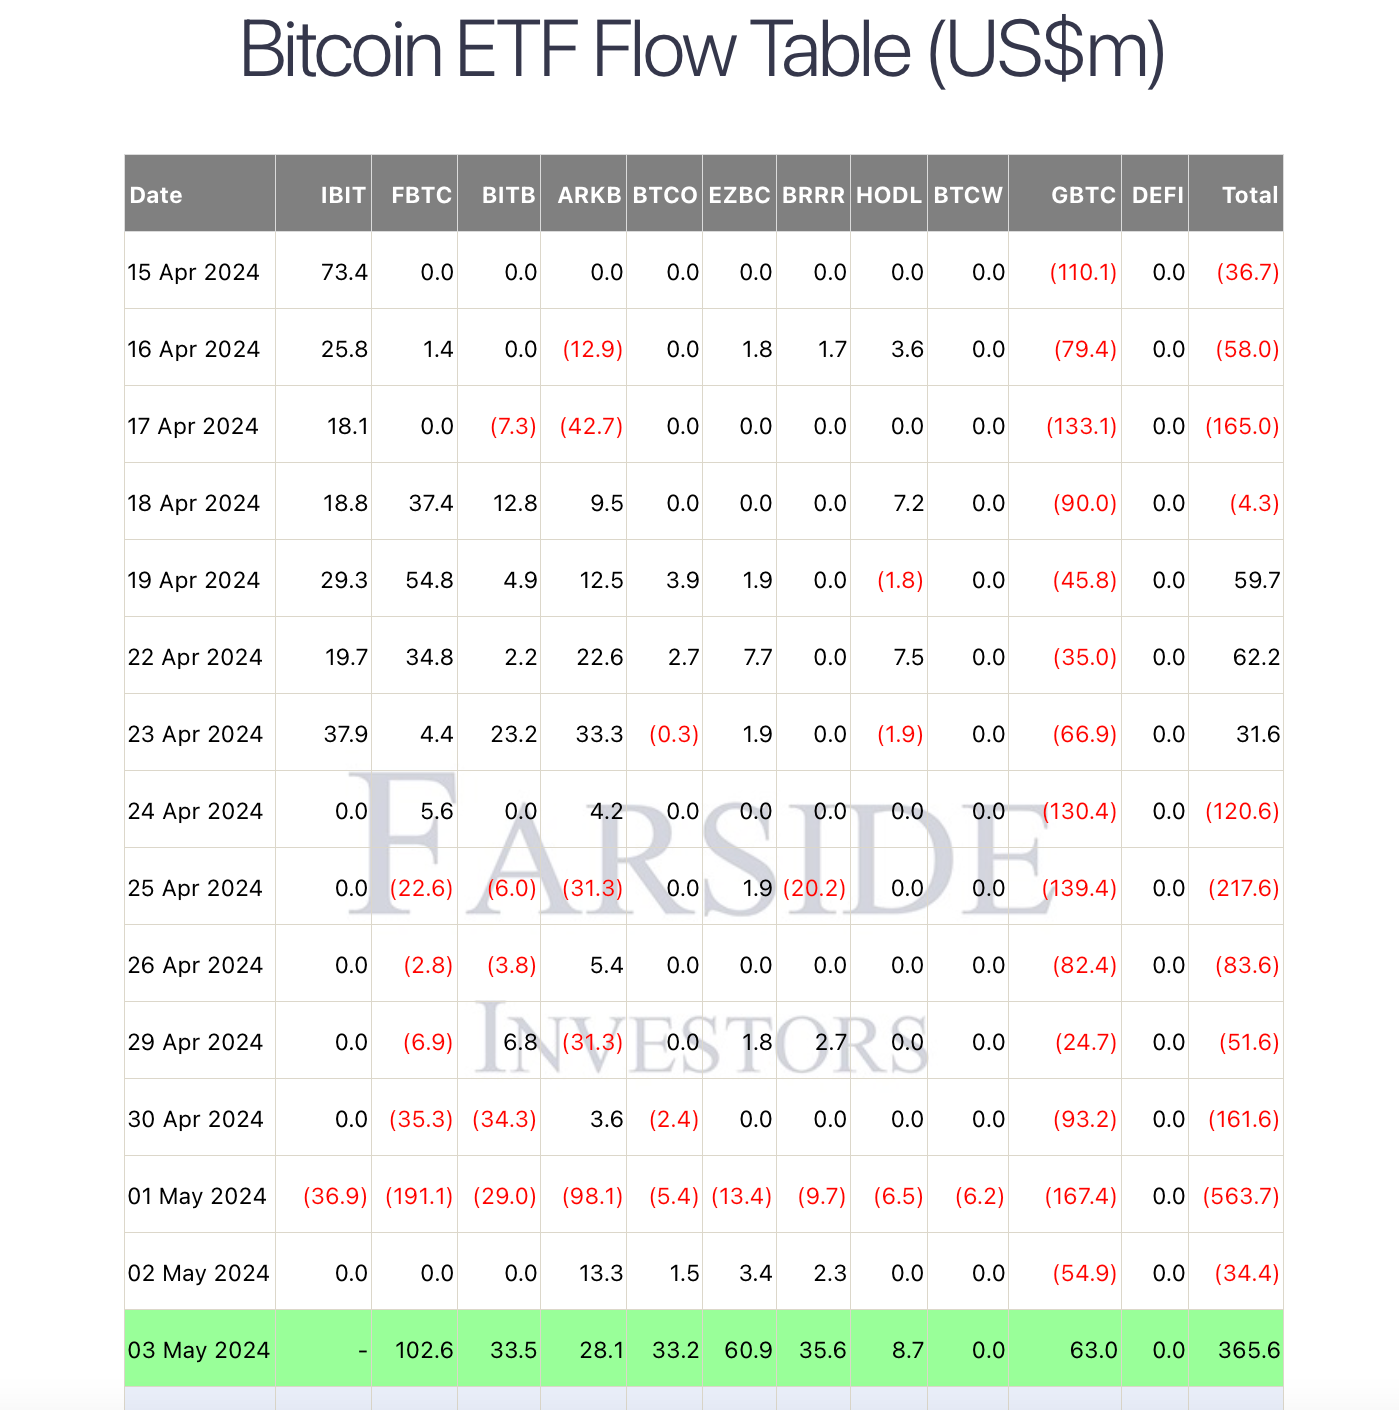 gbtc bitcoin etf records positive inflow for the first time